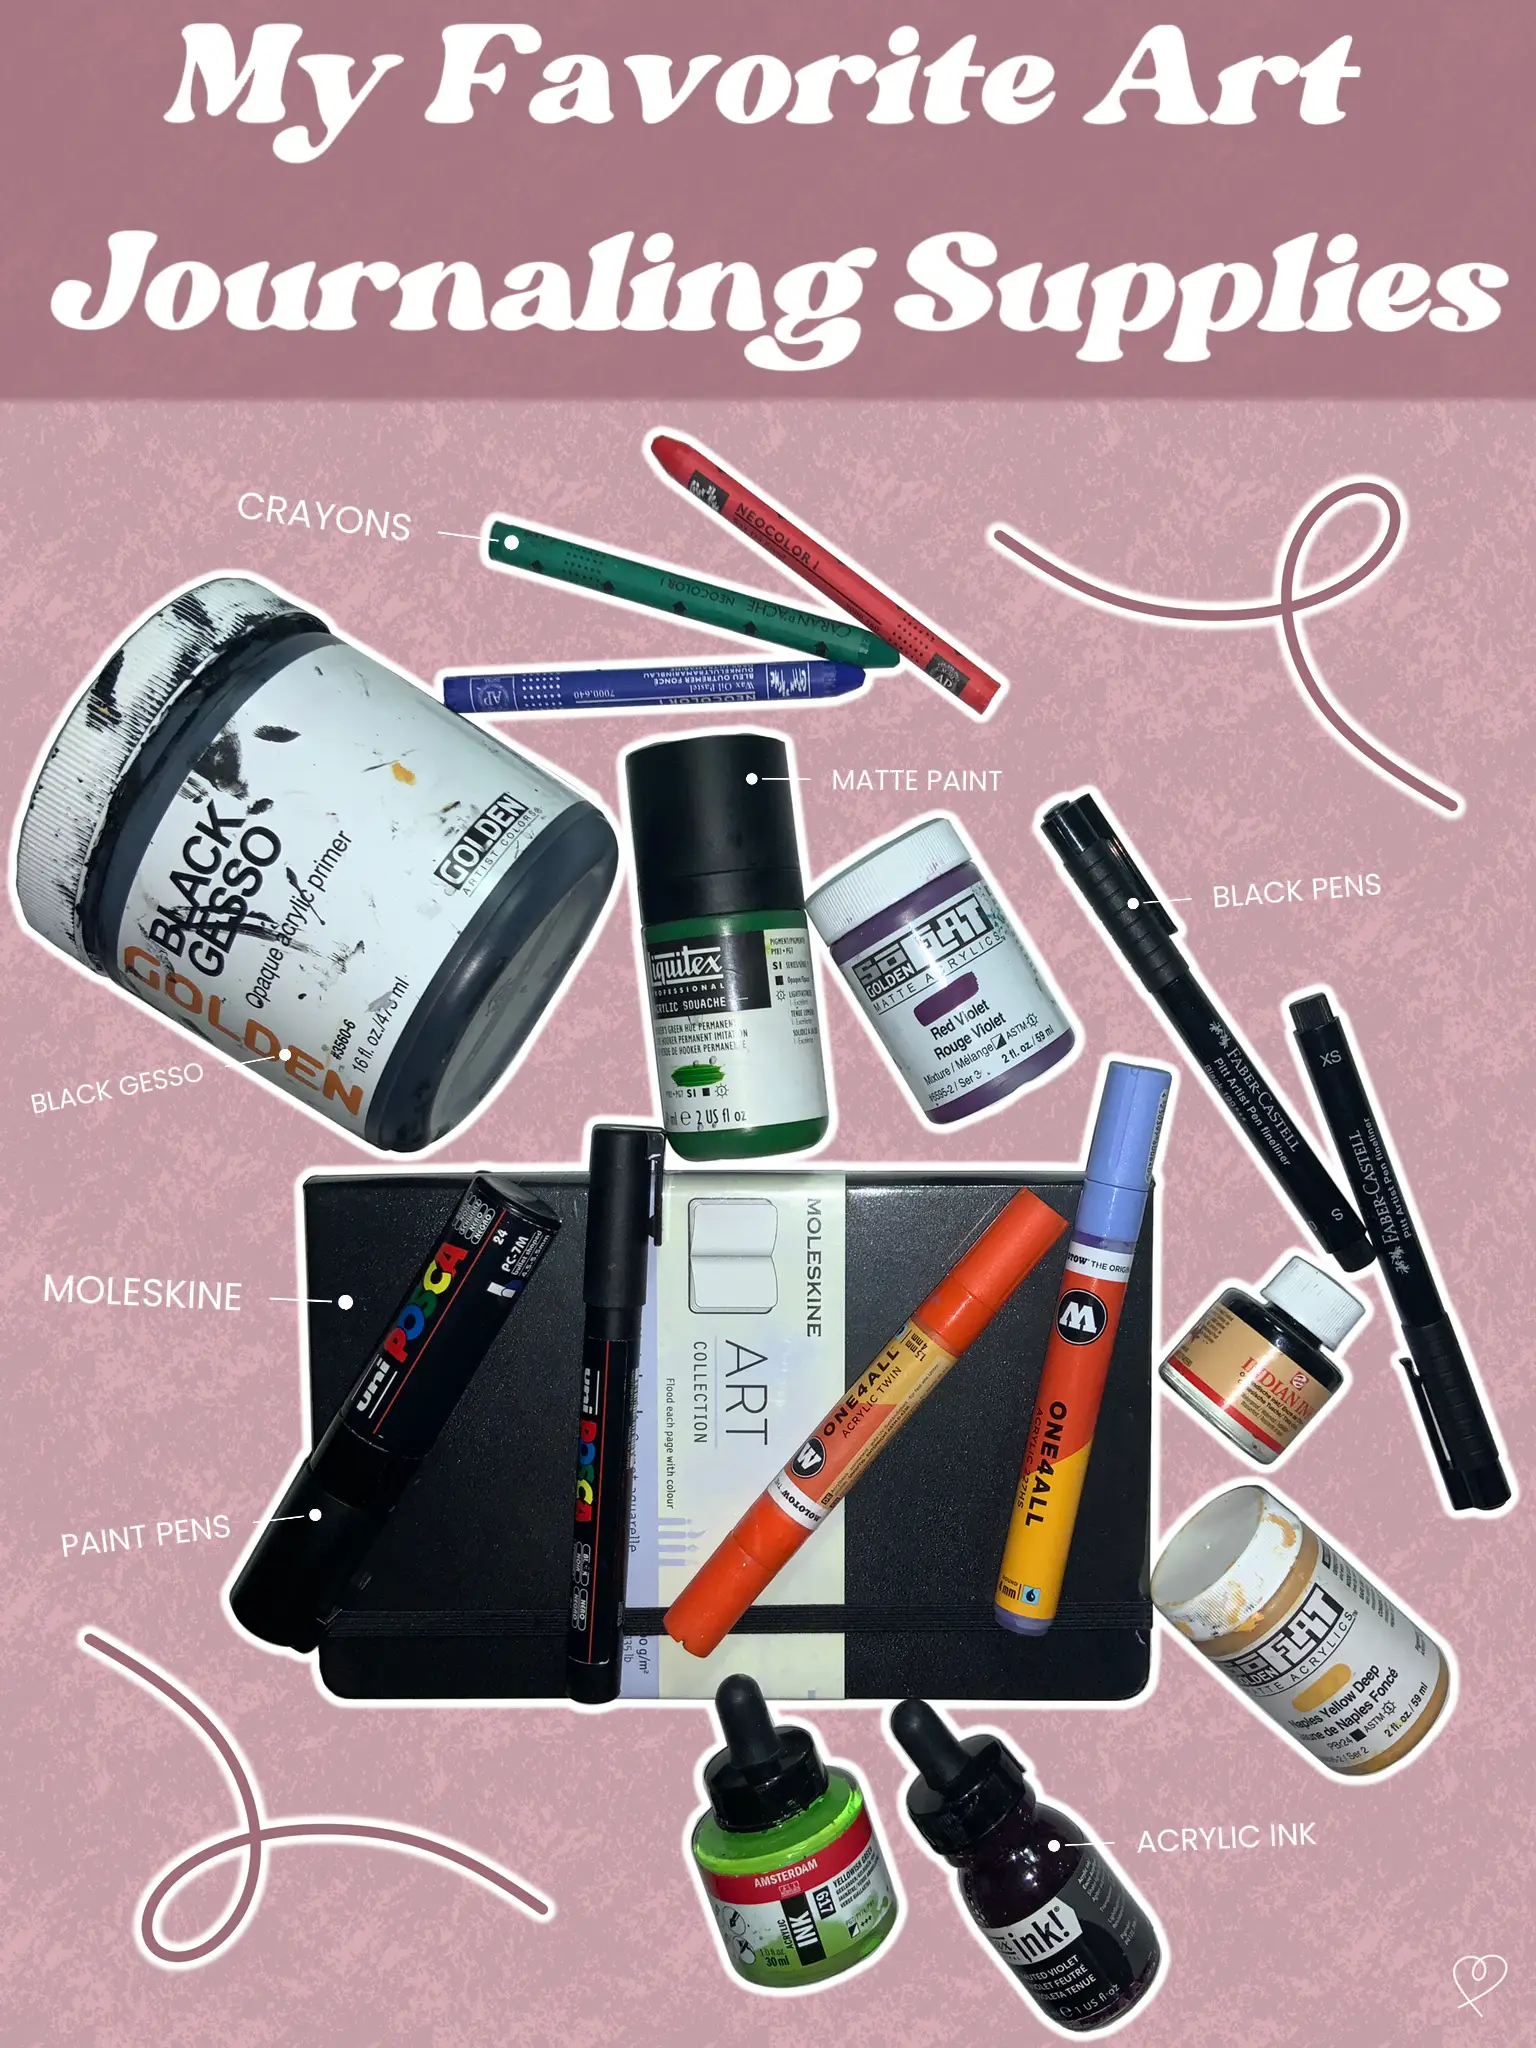 My Favorite Art Journaling Supplies, Gallery posted by EmK